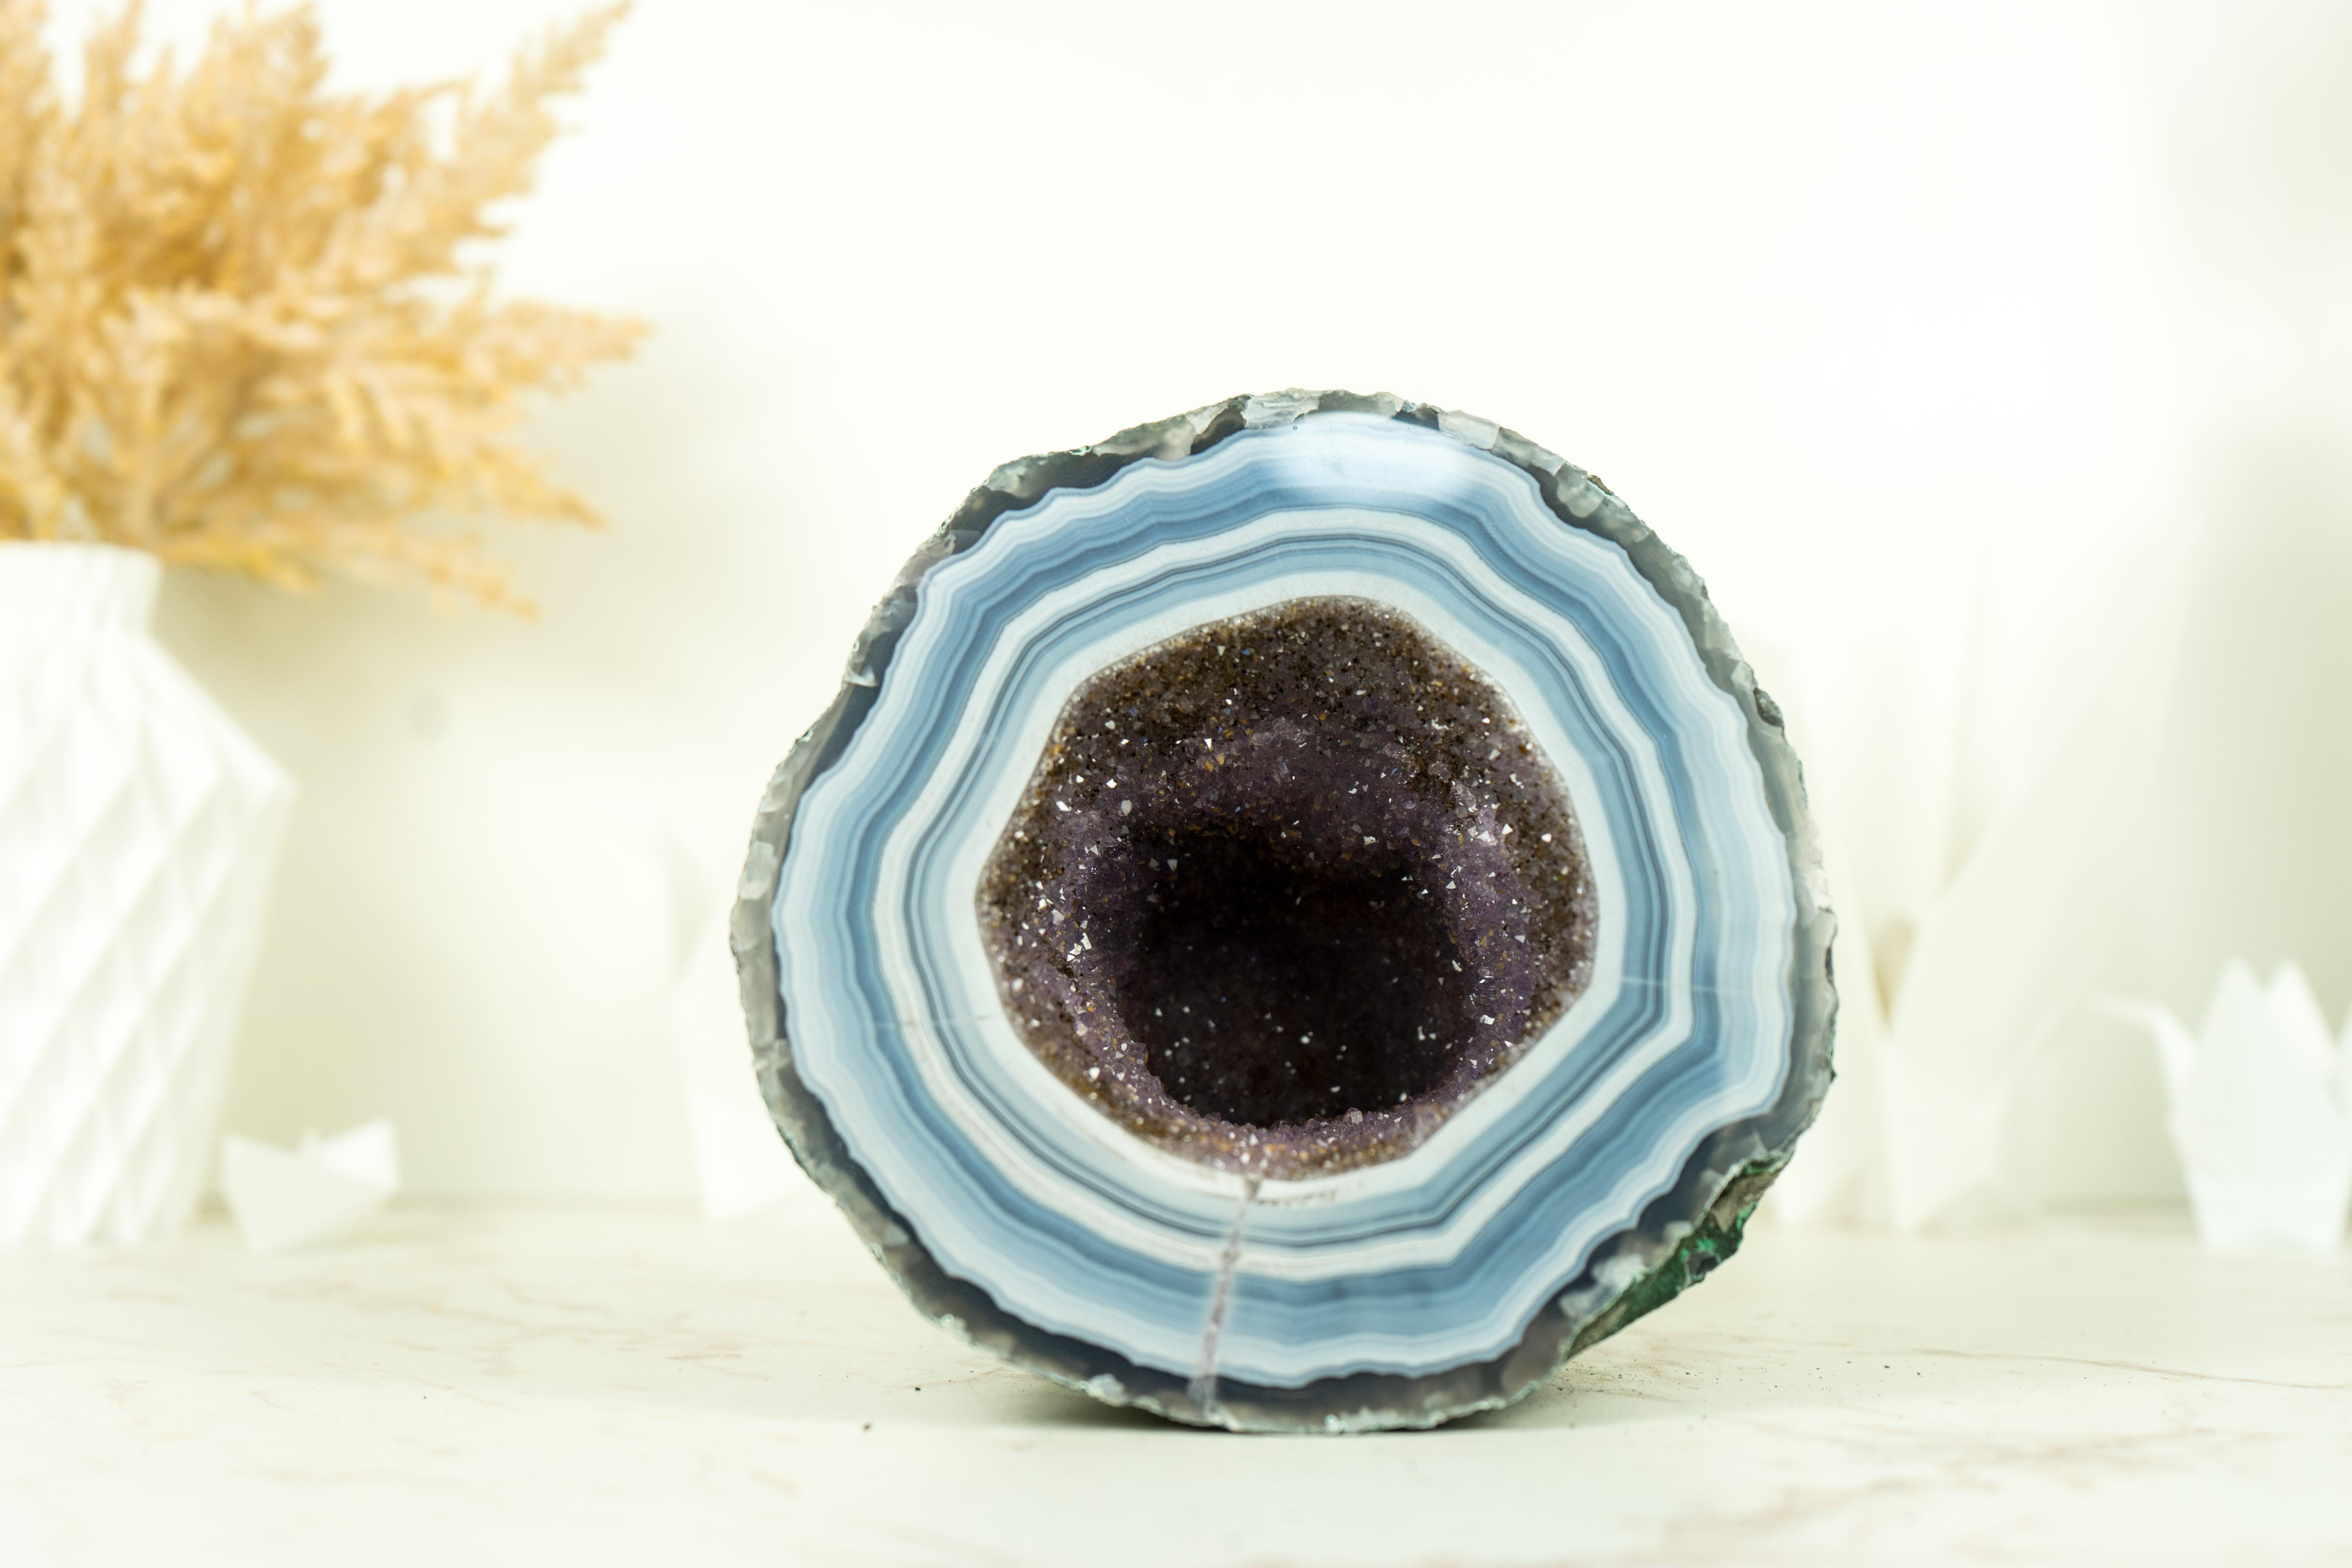 Amethyst Small Agate Geode with World-Class Blue Banded Agate and Galaxy Druzy